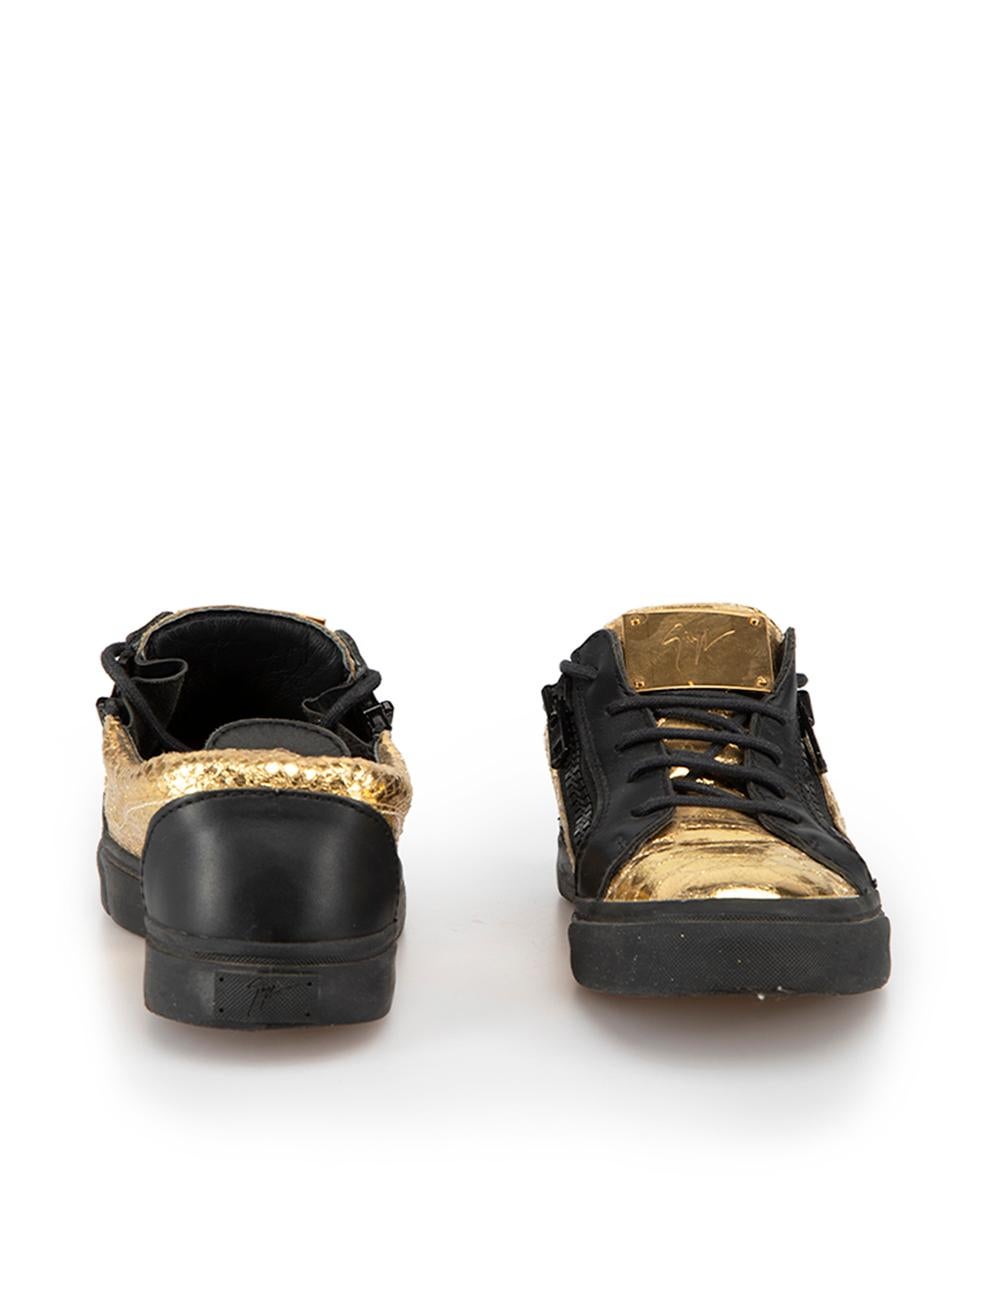 Gold & Black Leather Snakeskin Embossed Trainers Size IT 36 In Good Condition For Sale In London, GB